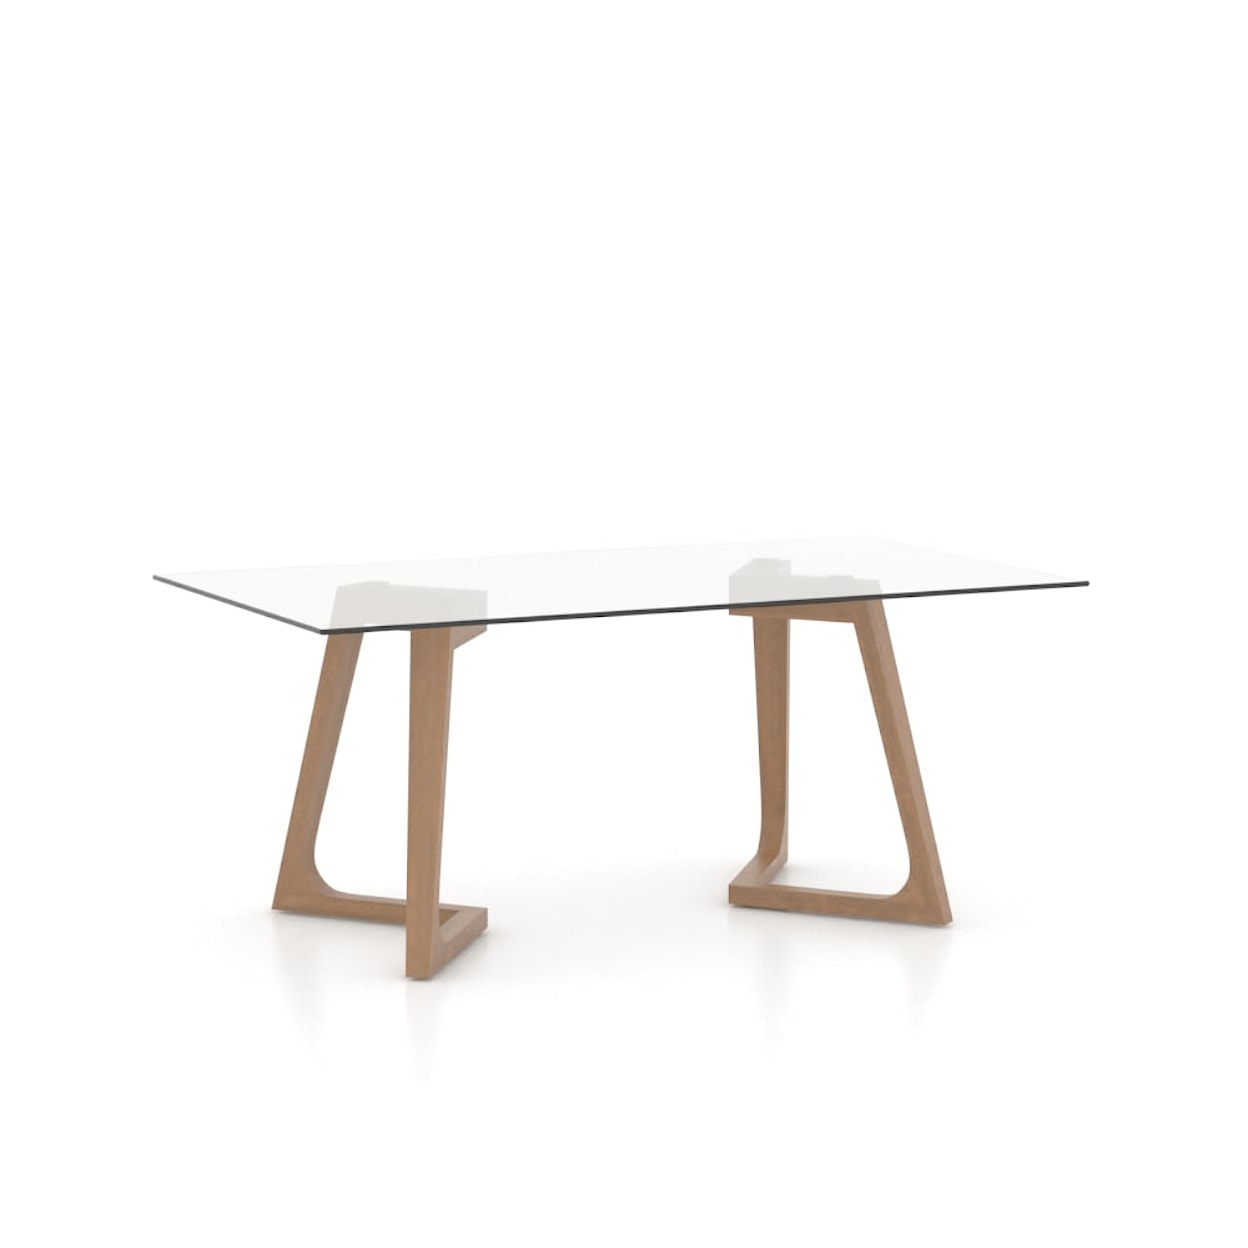 Canadel Modern Glass Top Dining Table